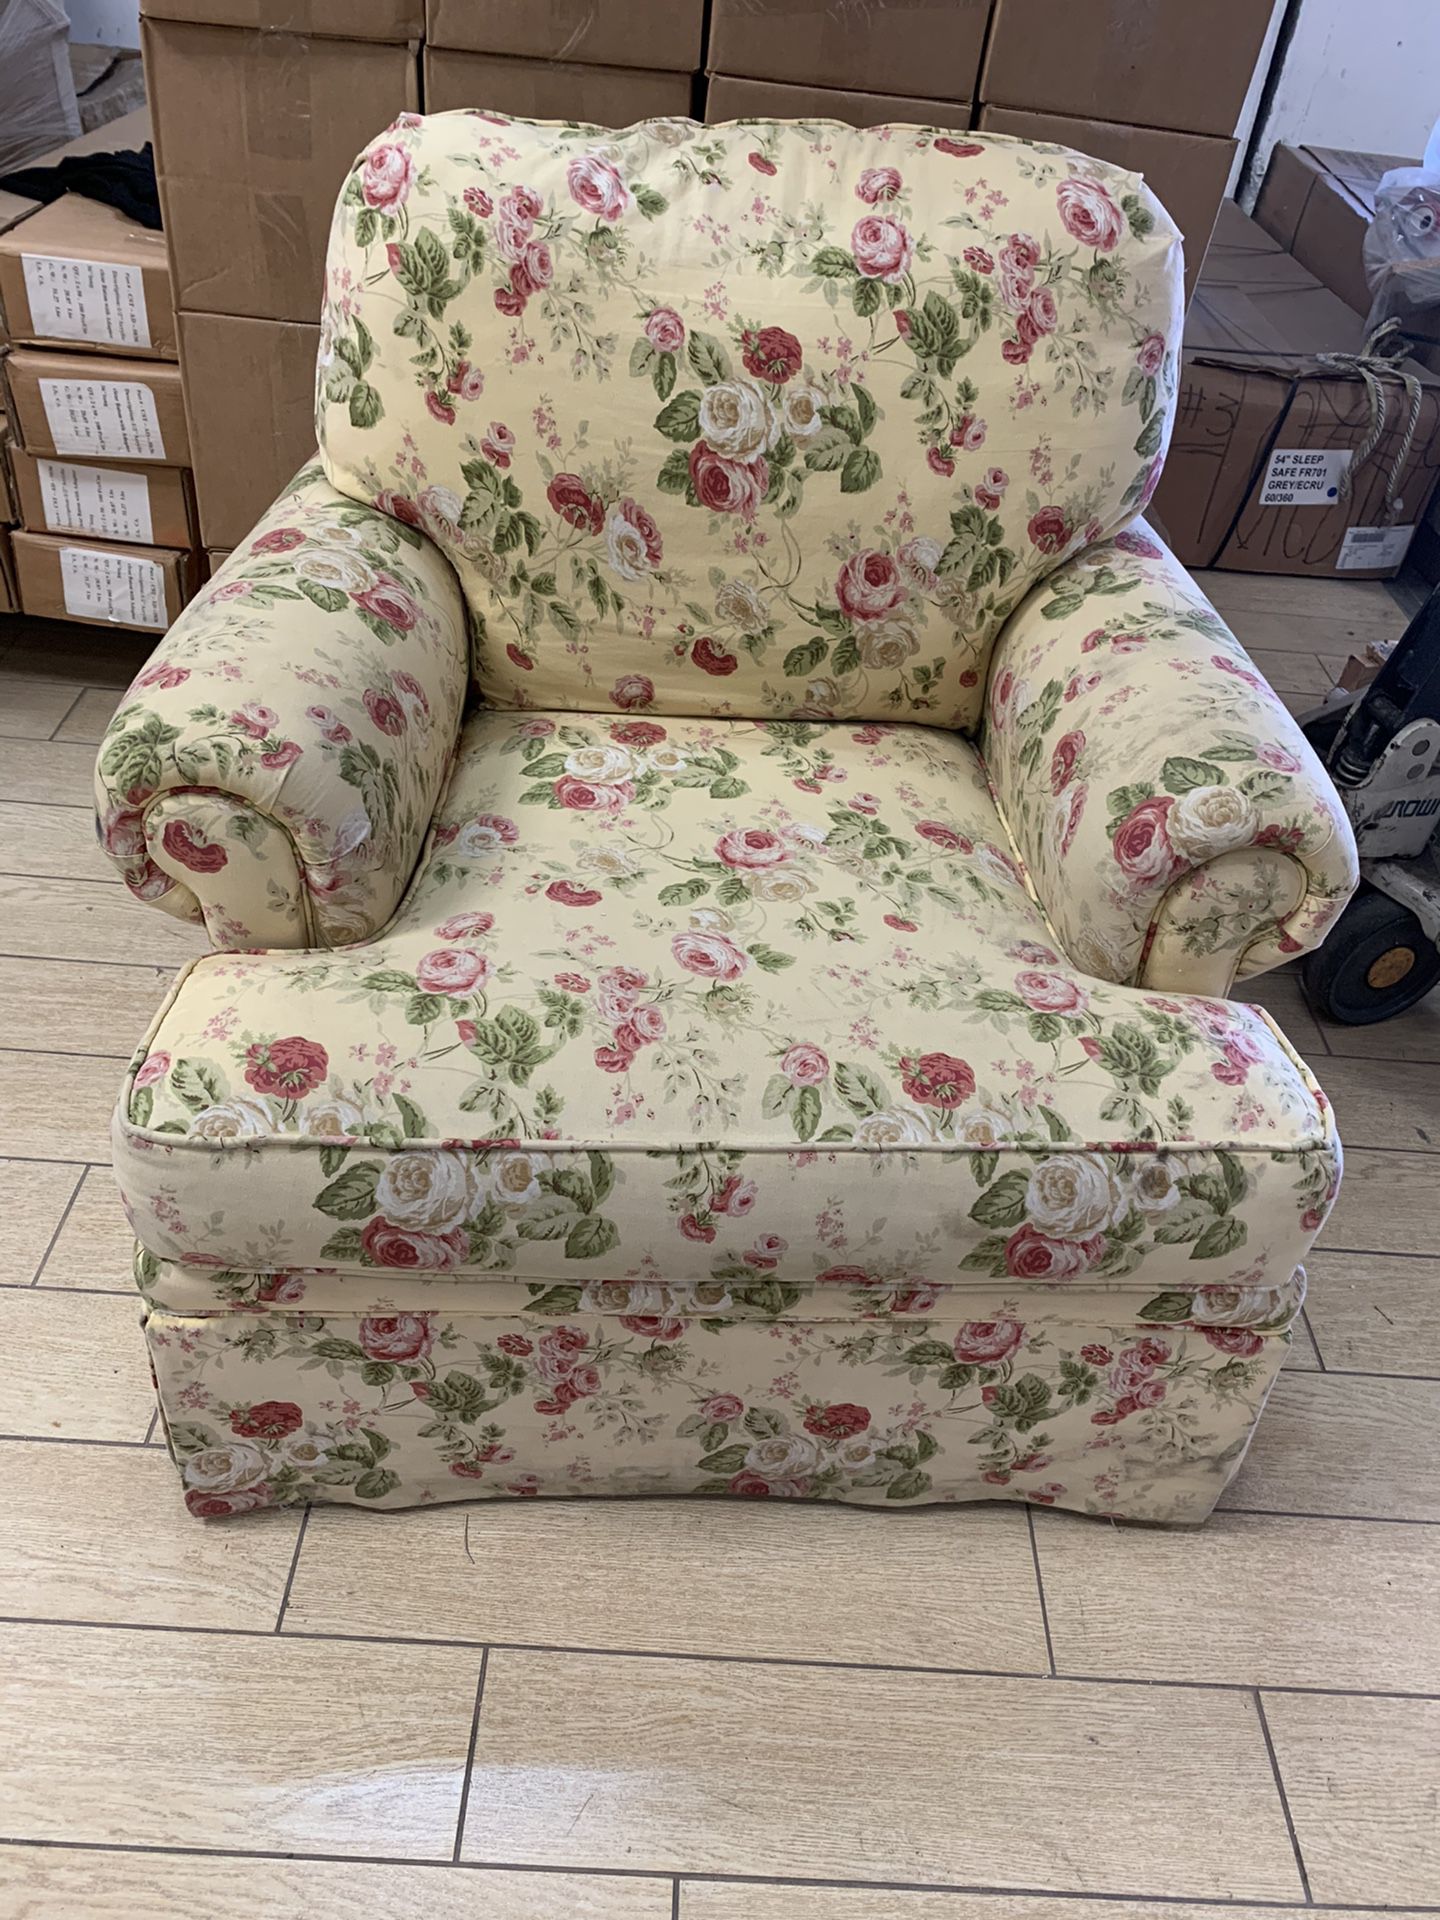 Beautiful comfortable floral chair paid 600 for it